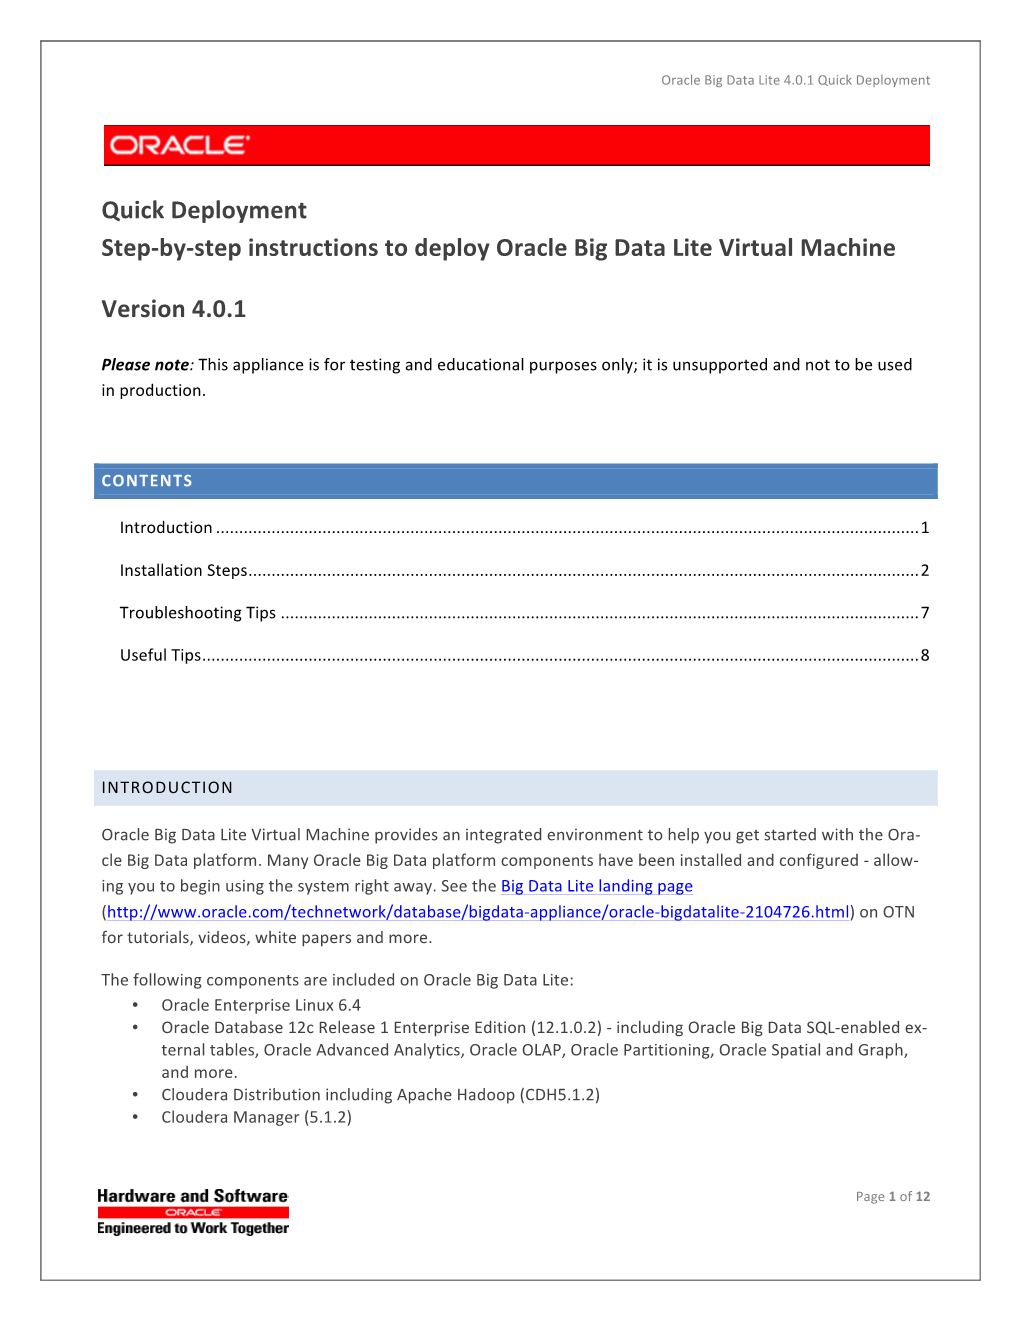 Quick Deployment Step-‐By-‐Step Instructions to Deploy Oracle Big Data Lite